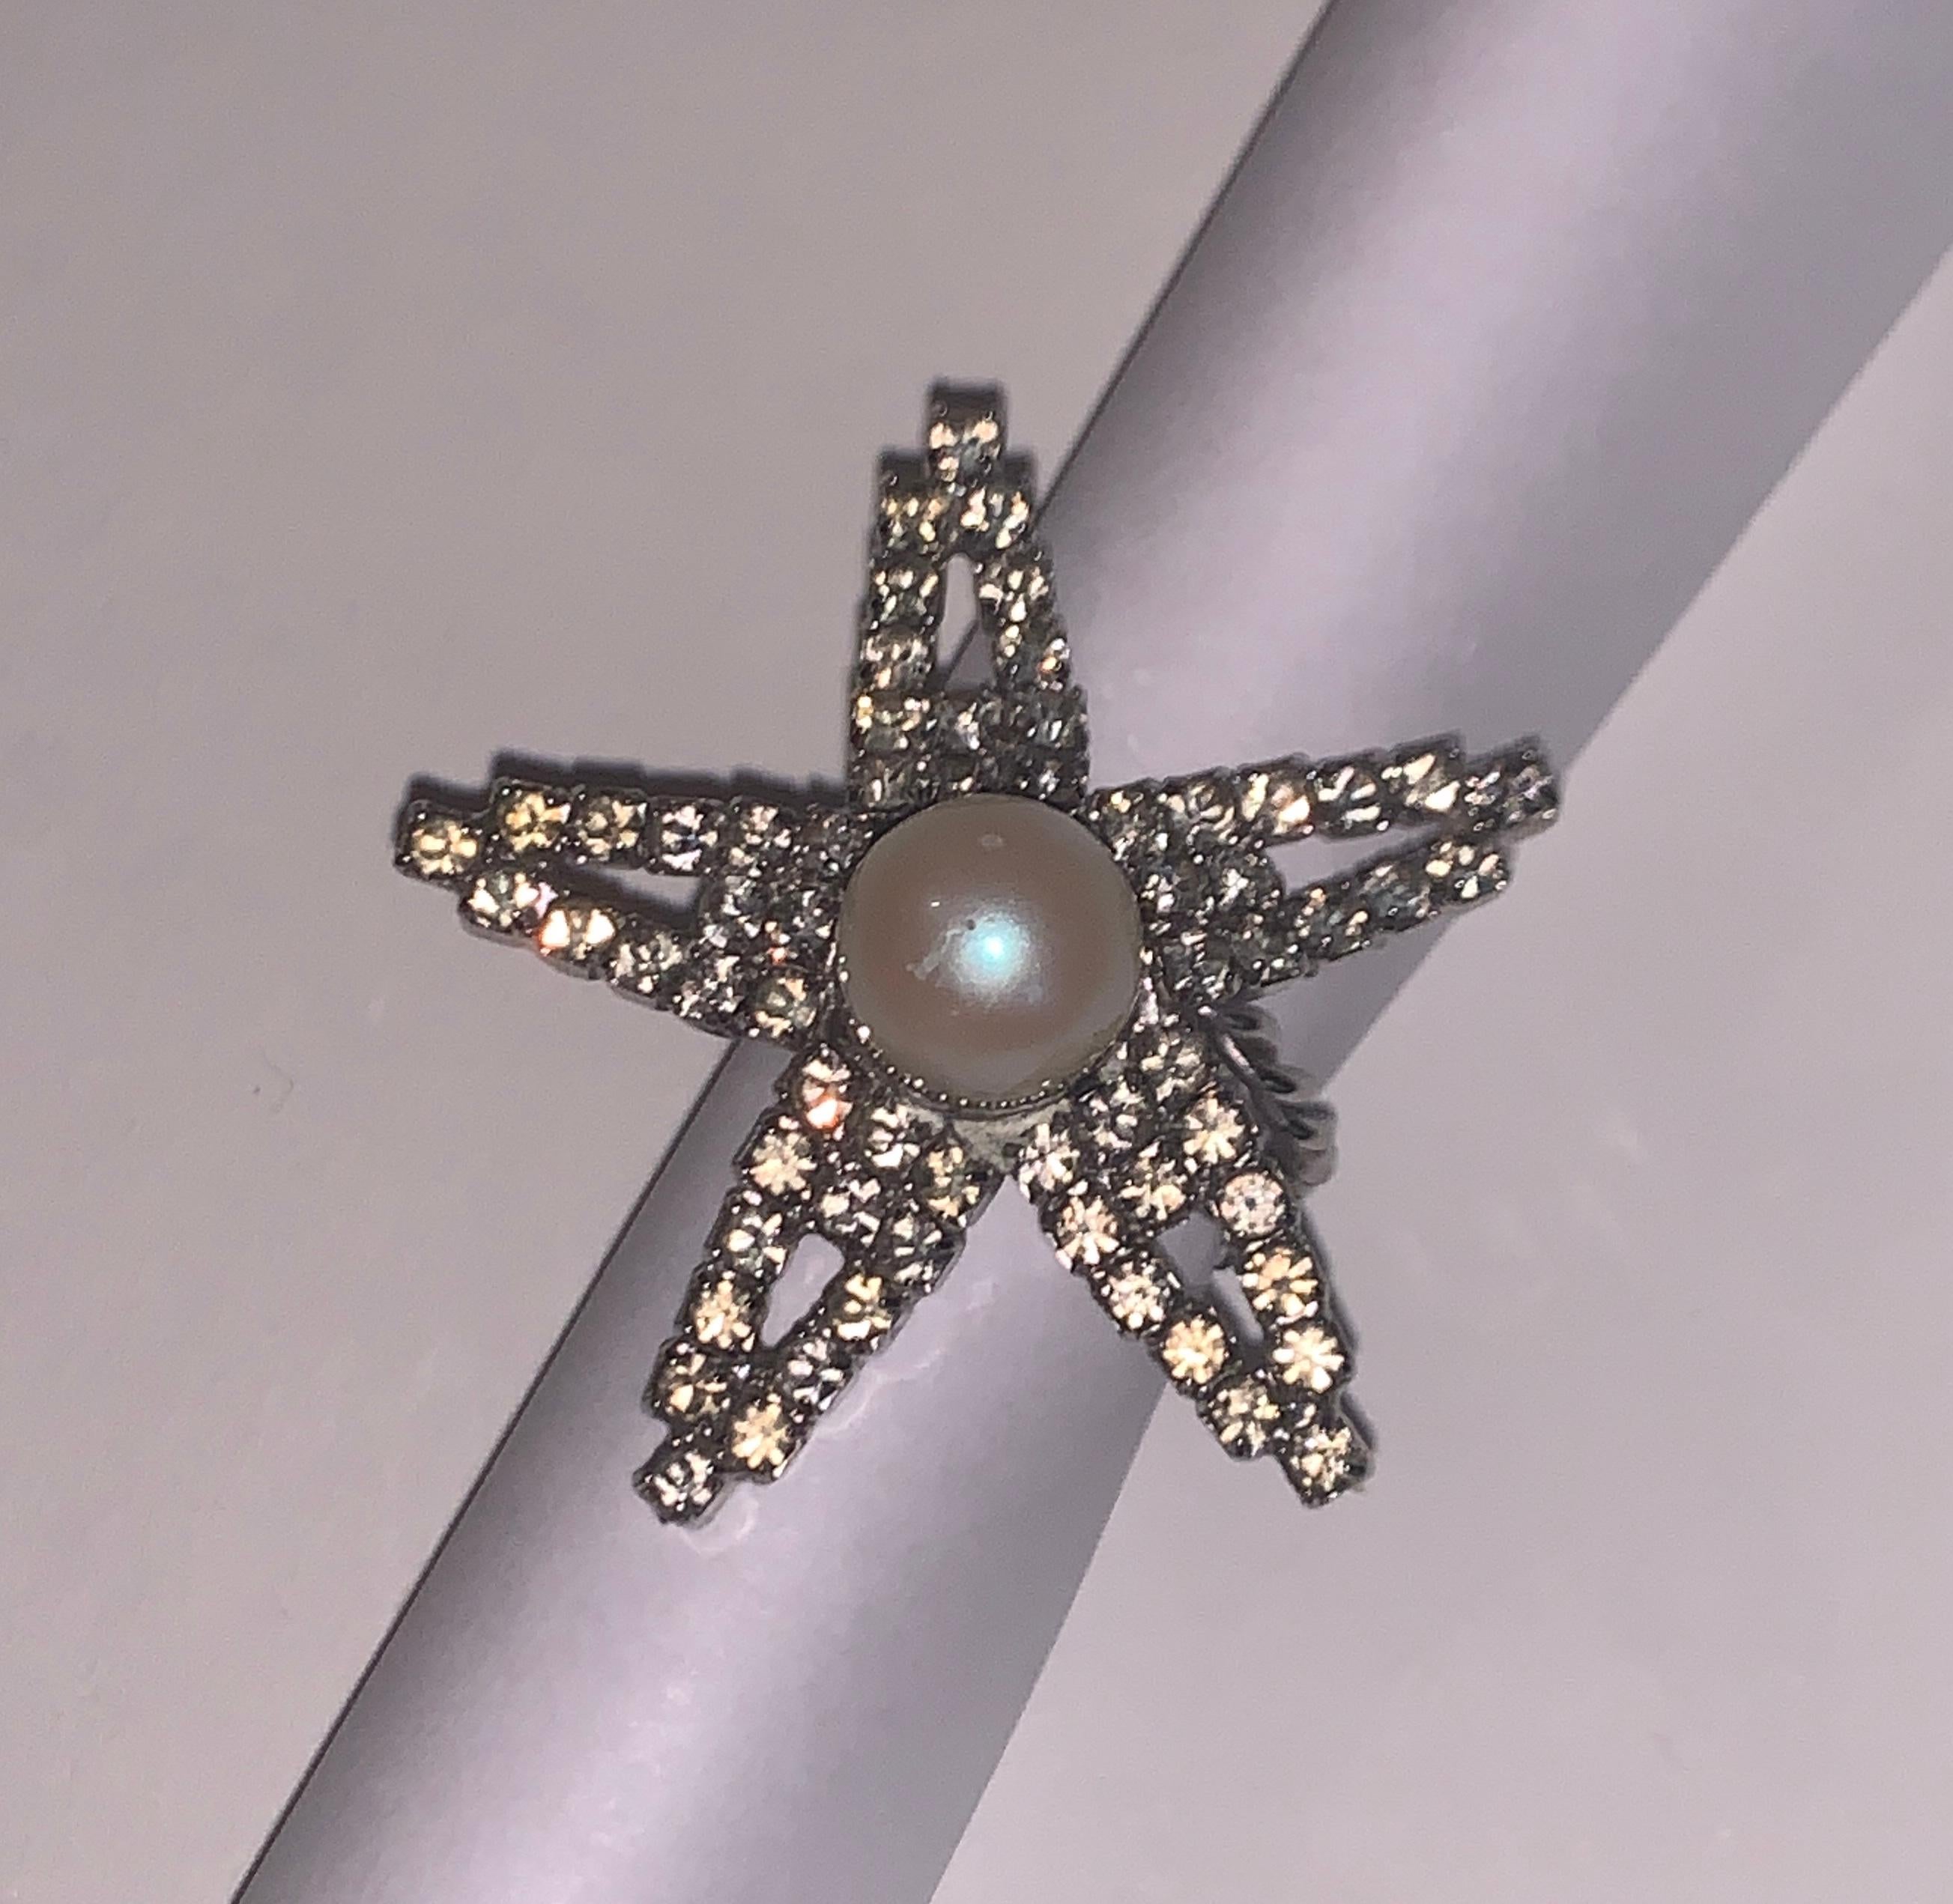 William de Lillo vintage 1970s silver rhinestone star shaped statement cocktail ring with large faux pearl center. 

Signed de Lillo at back.

Measures approximately 1 1/2